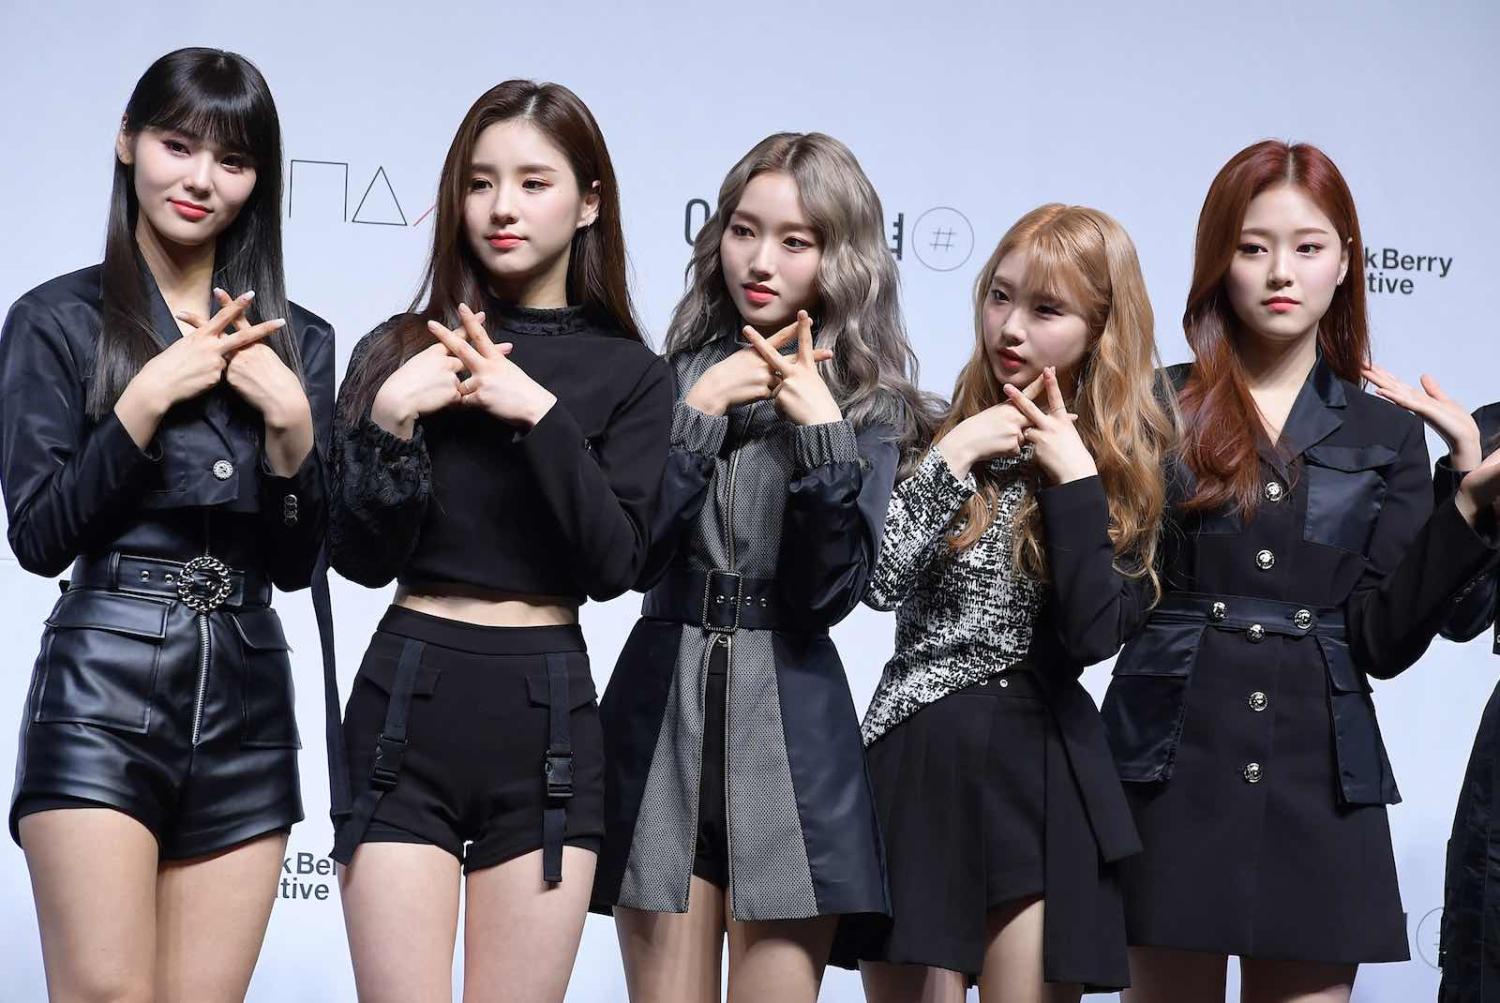 South Korean girl group LOONA promoting an album in February: K-pop superfans are ever active online (The Chosunilbo JNS via Getty Images)